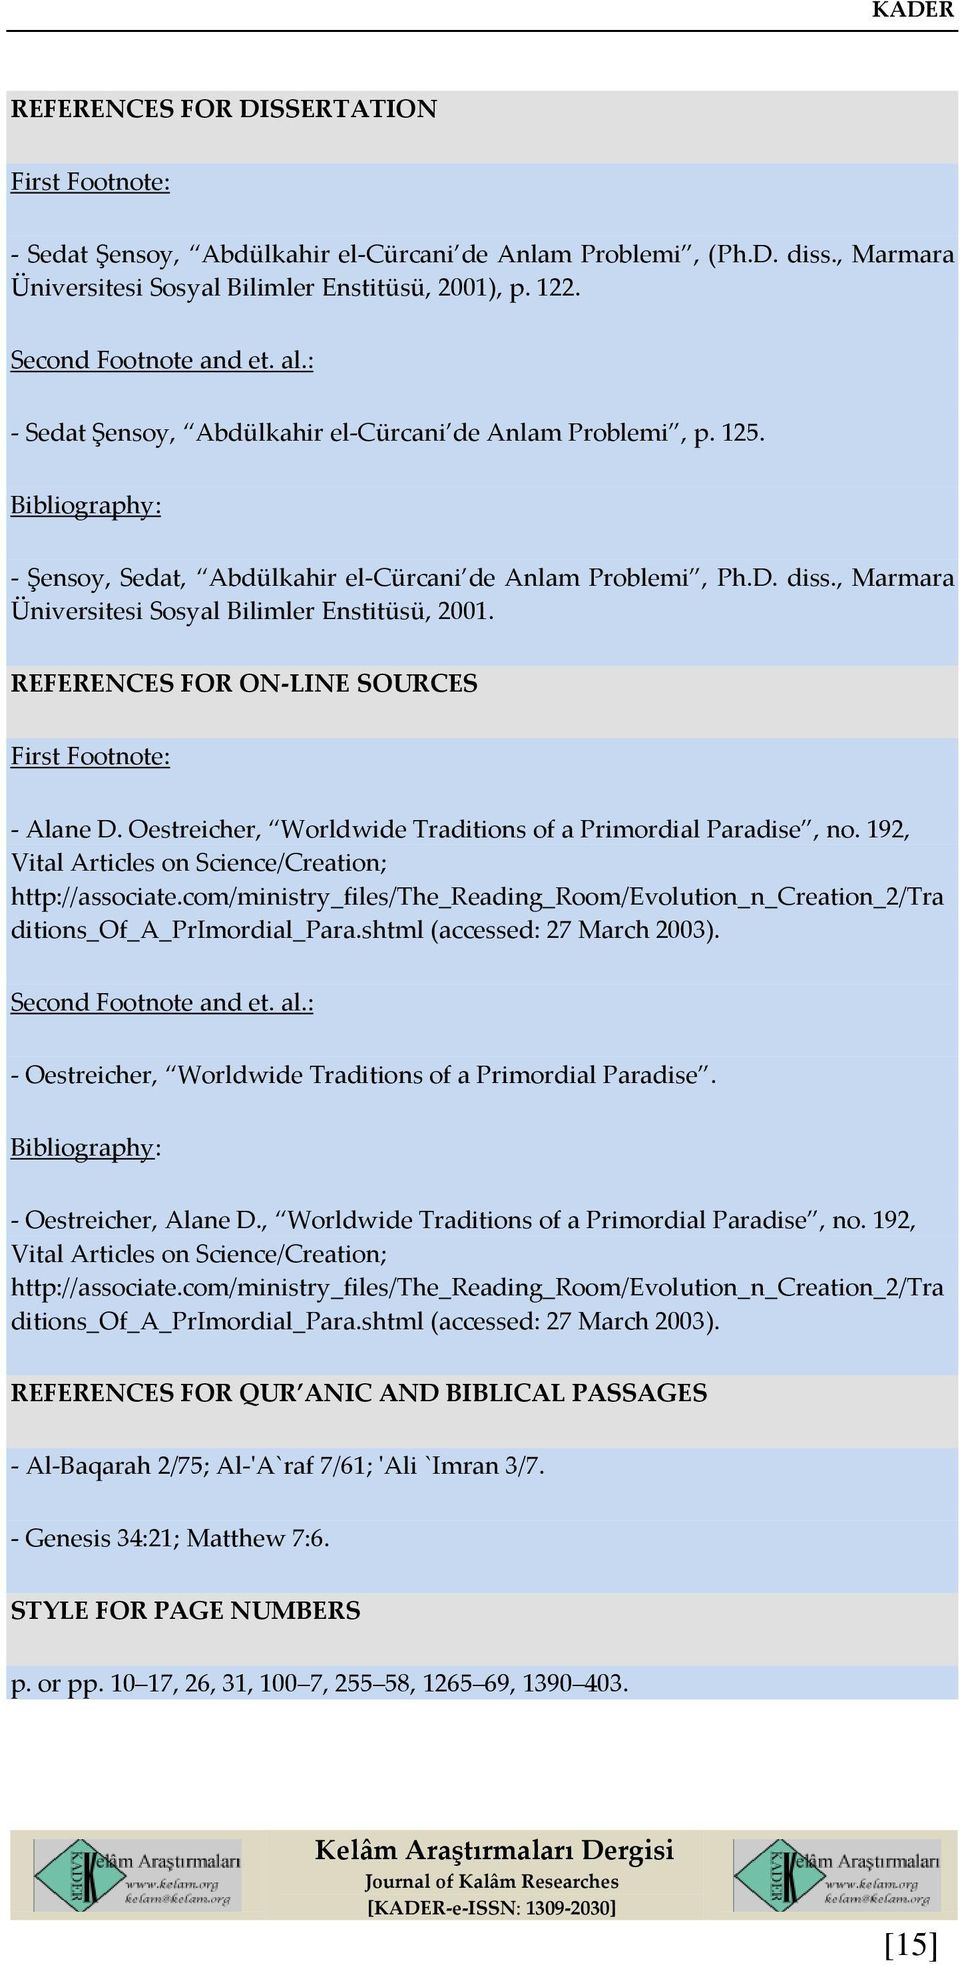 REFERENCES FOR ON-LINE SOURCES - Alane D. Oestreicher, Worldwide Traditions of a Primordial Paradise, no. 192, Vital Articles on Science/Creation; http://associate.